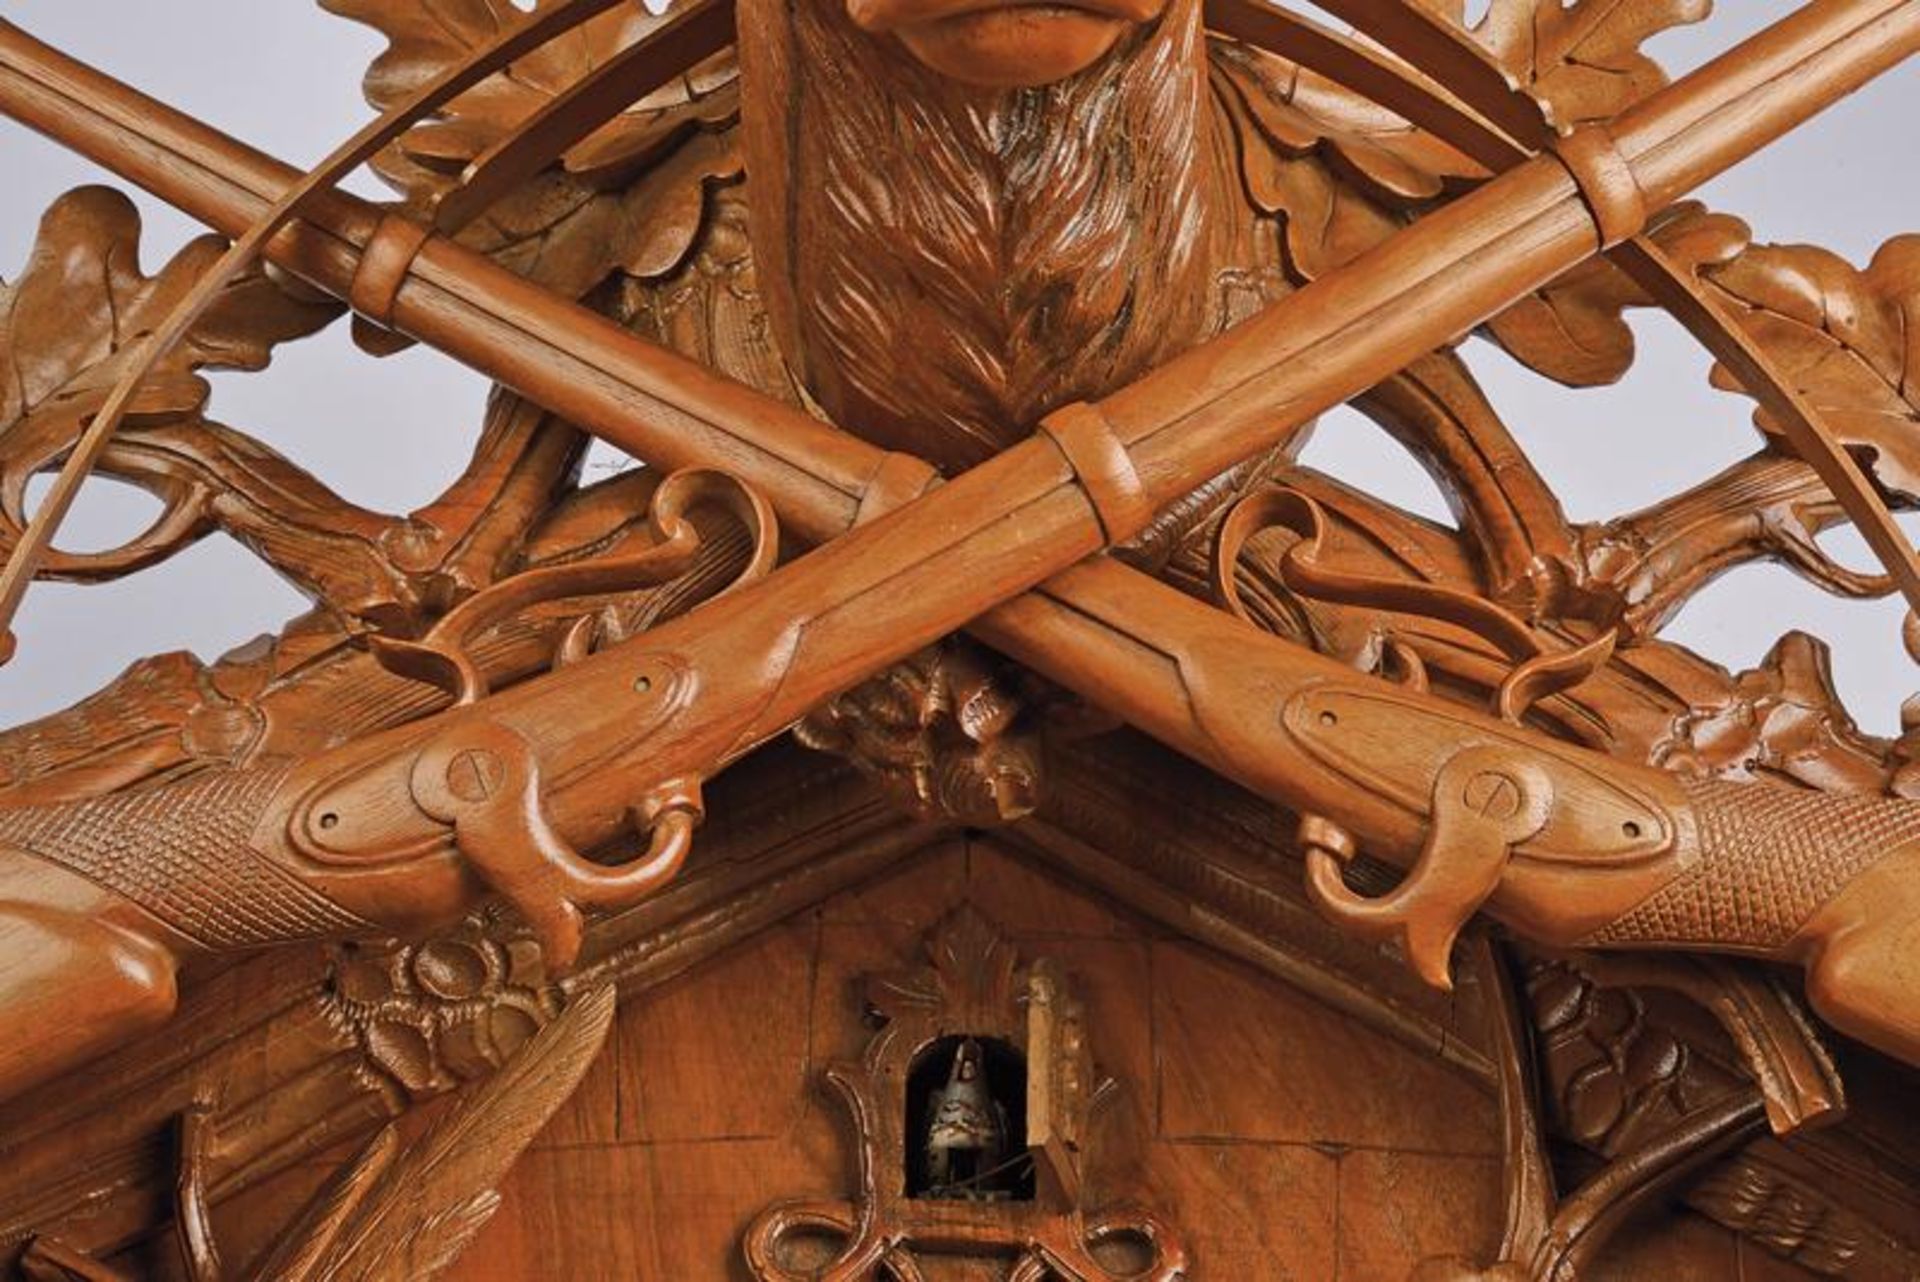 A cuckoo clock - hunting trophy - Image 3 of 5